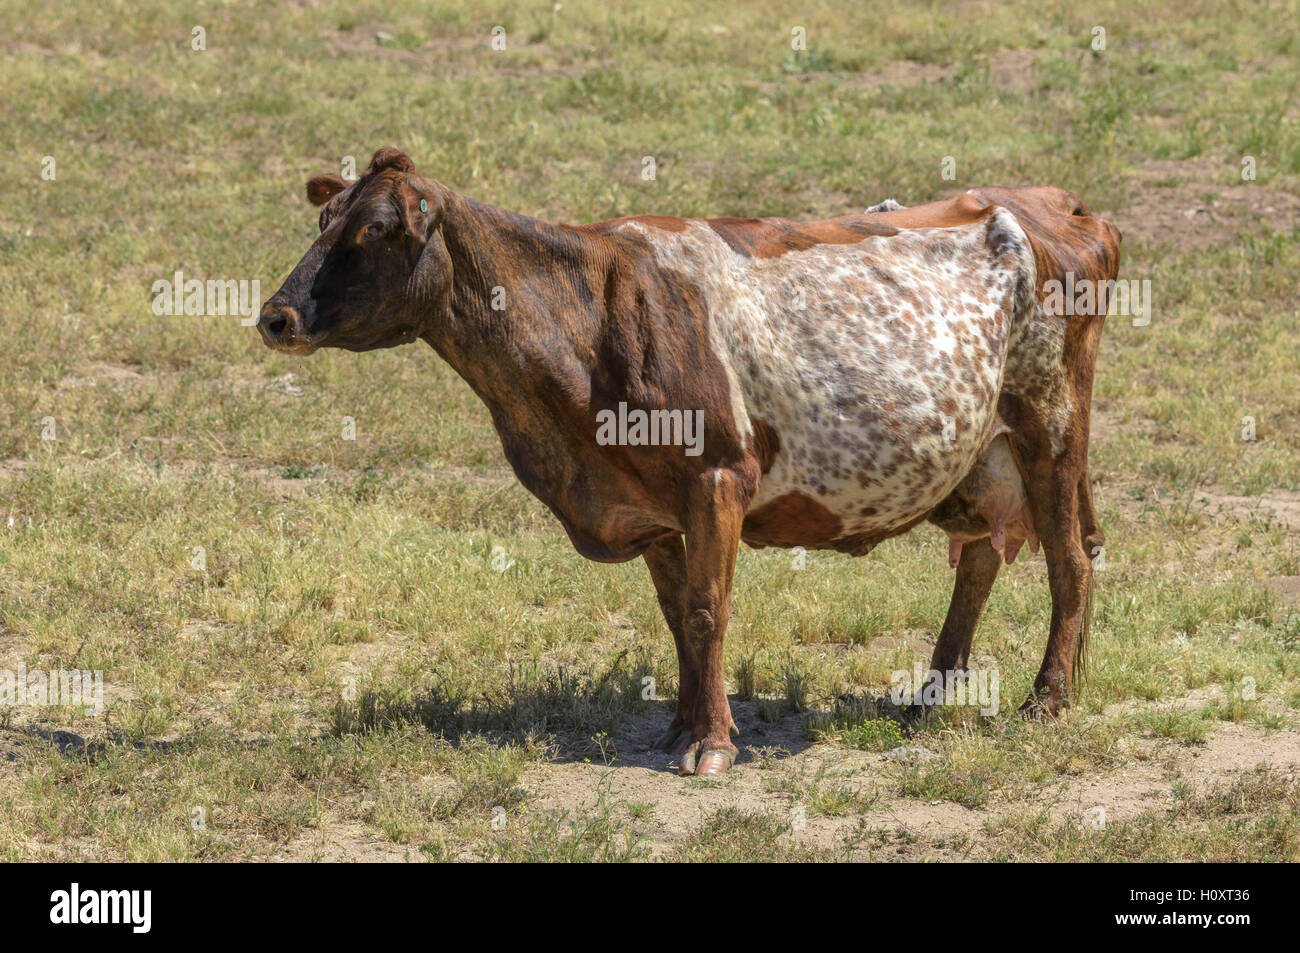 Lait Jersey cow standing in pasture Banque D'Images